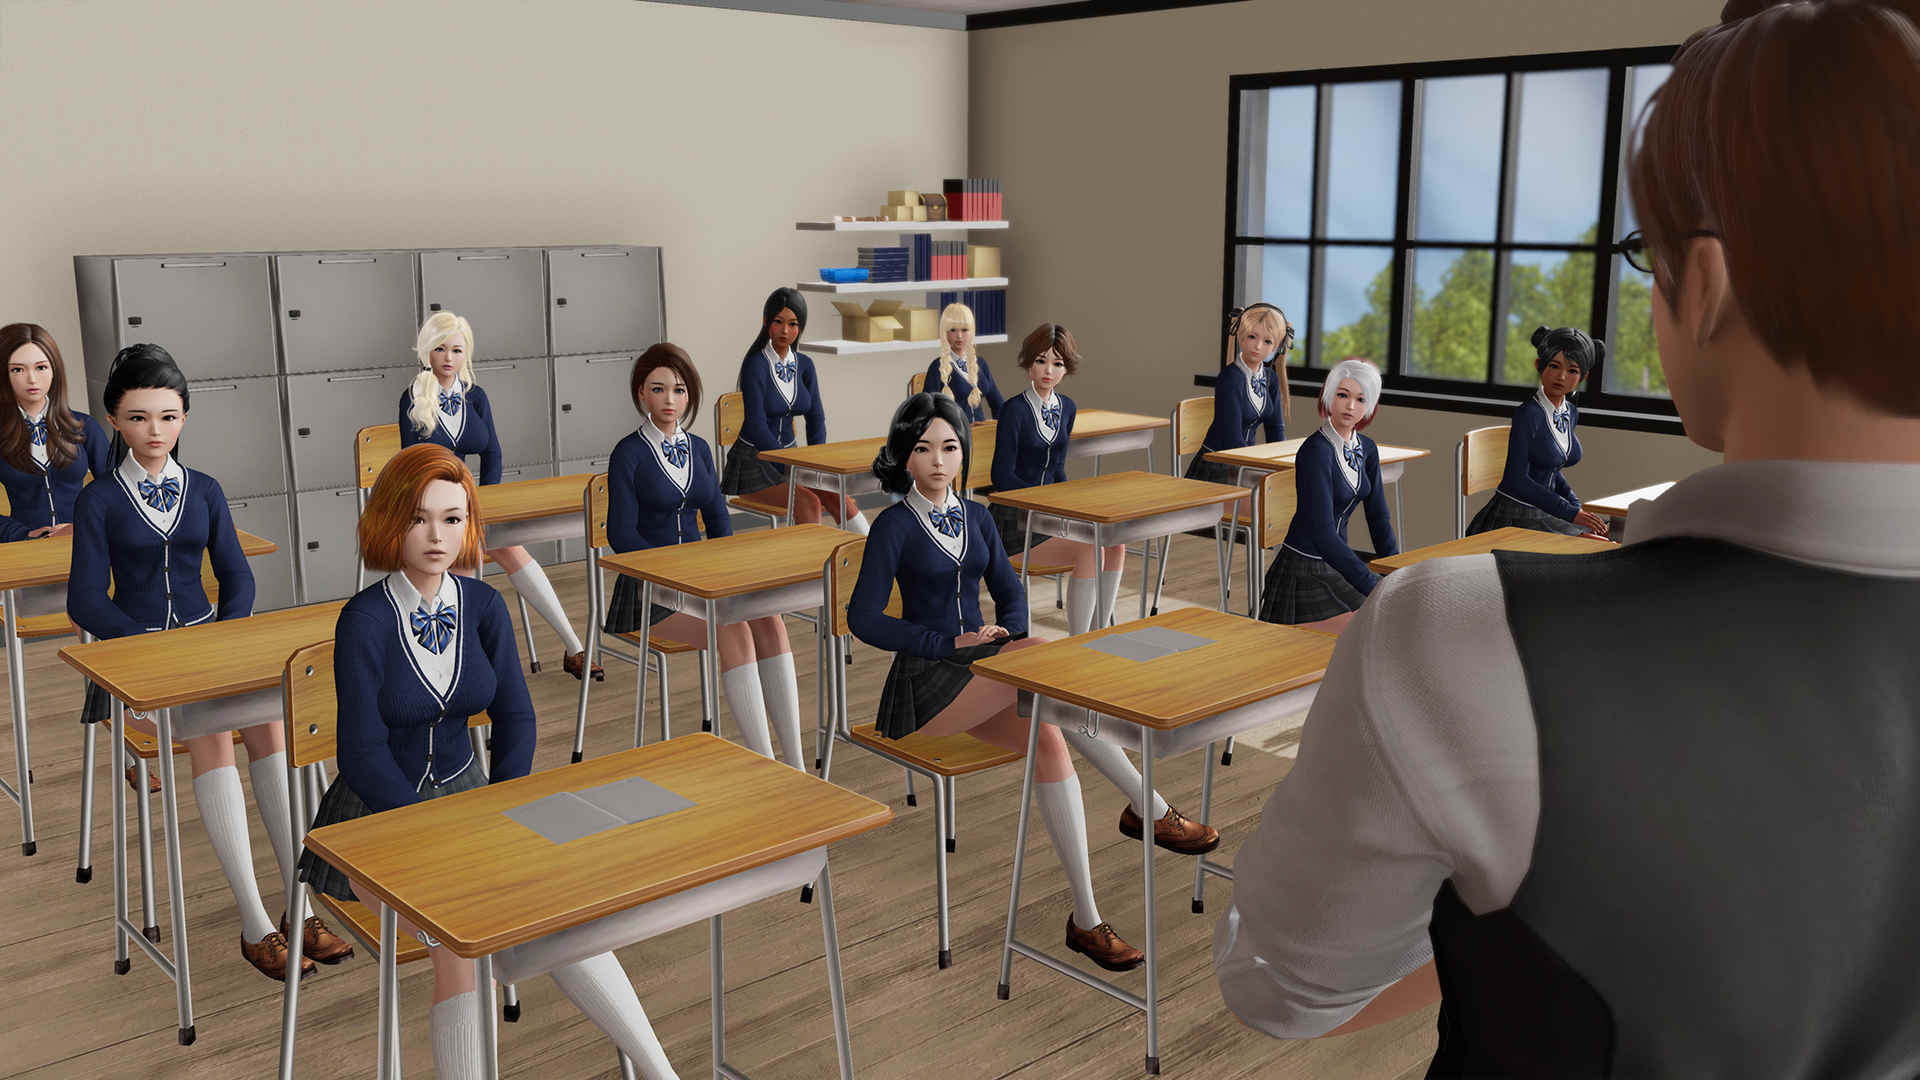 The Headmaster porn xxx game download cover